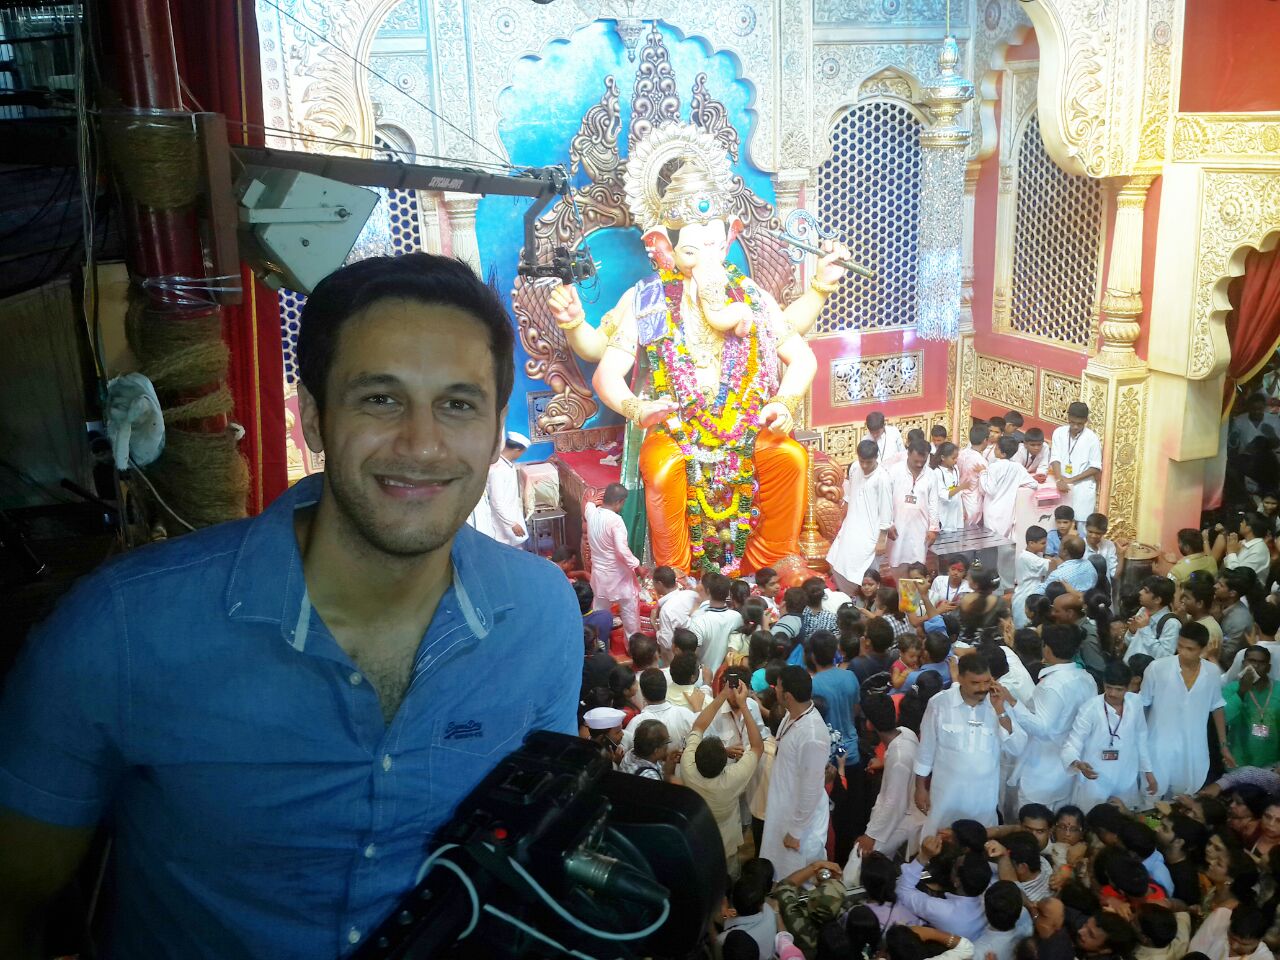 Danny Sura - Behind the scenes picture on location of an episode of 'Spirit of India: The Festivals'. Covering the 'Ganesh Chaturthi' celebrations.